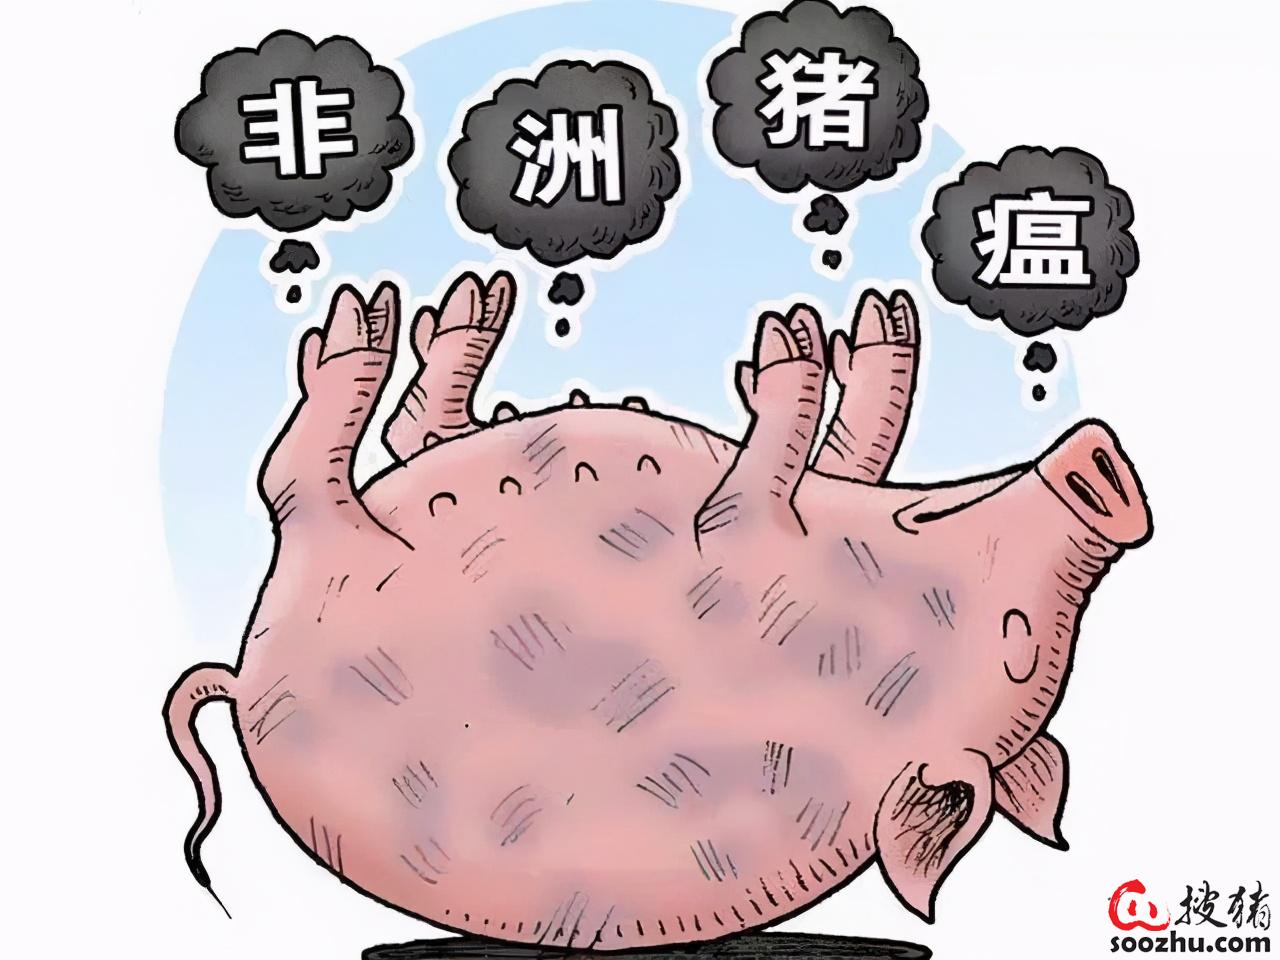 Dry goods, worth seeing!Researcher Qiu Huogi's seven views on the current African swine fever epidemic situation